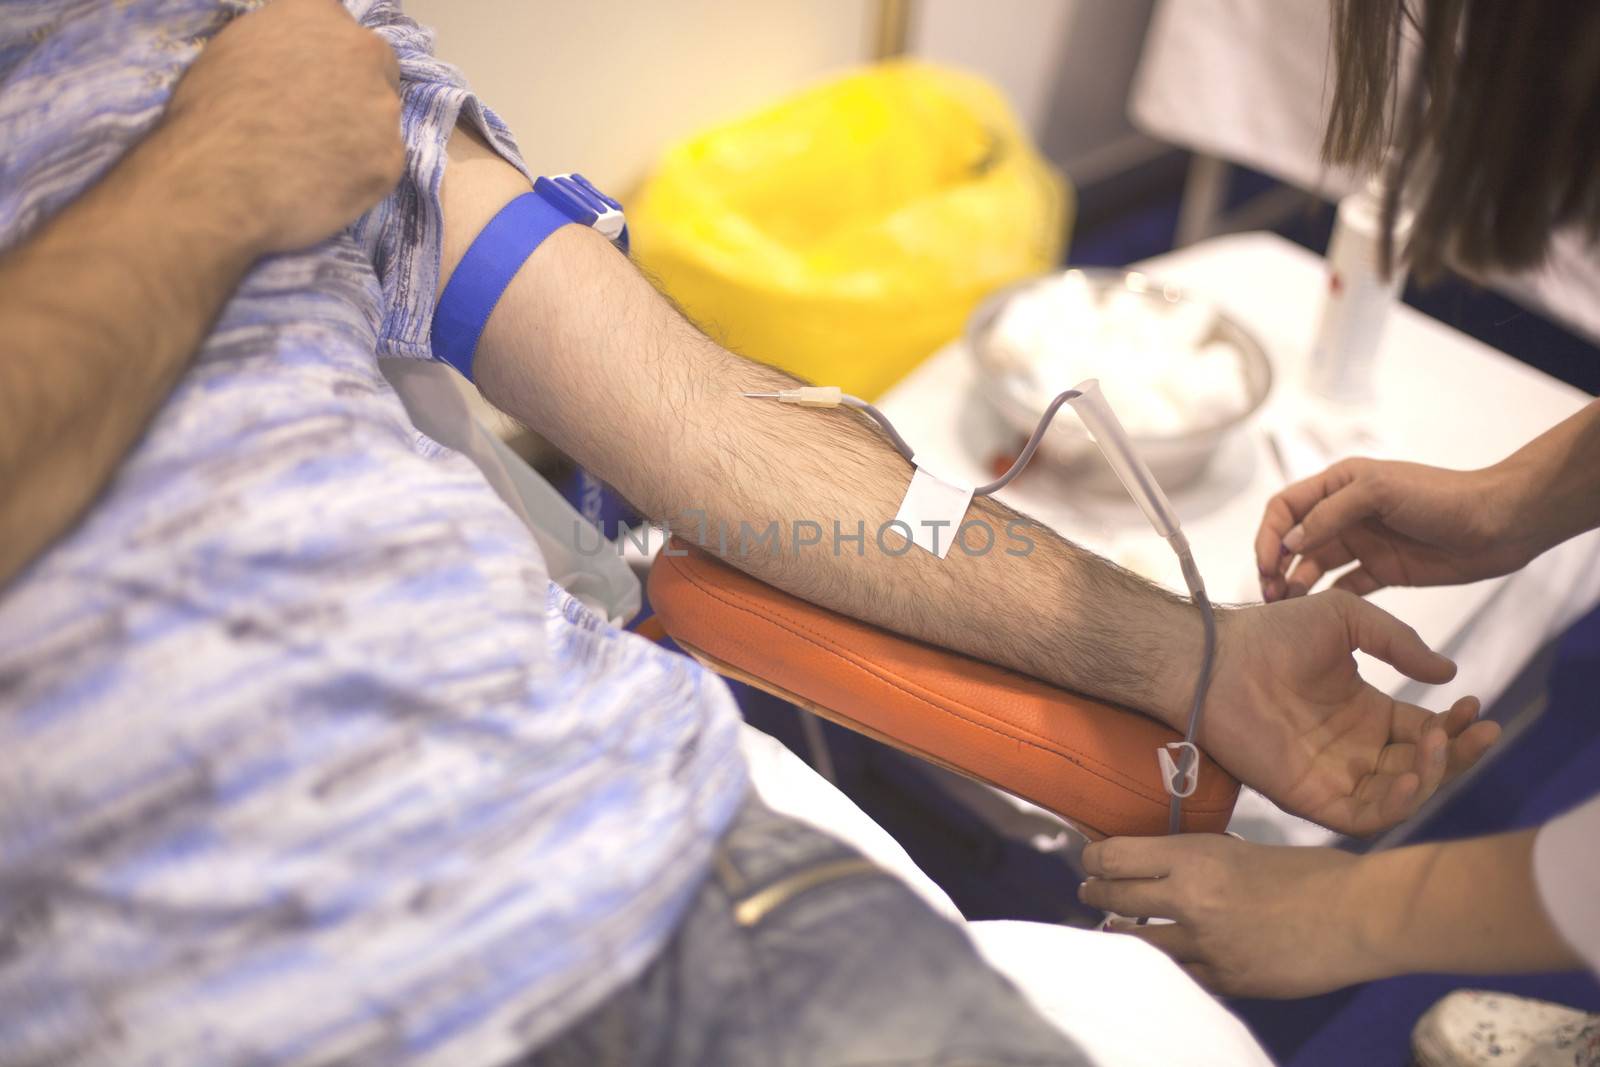 Blood donor by wellphoto